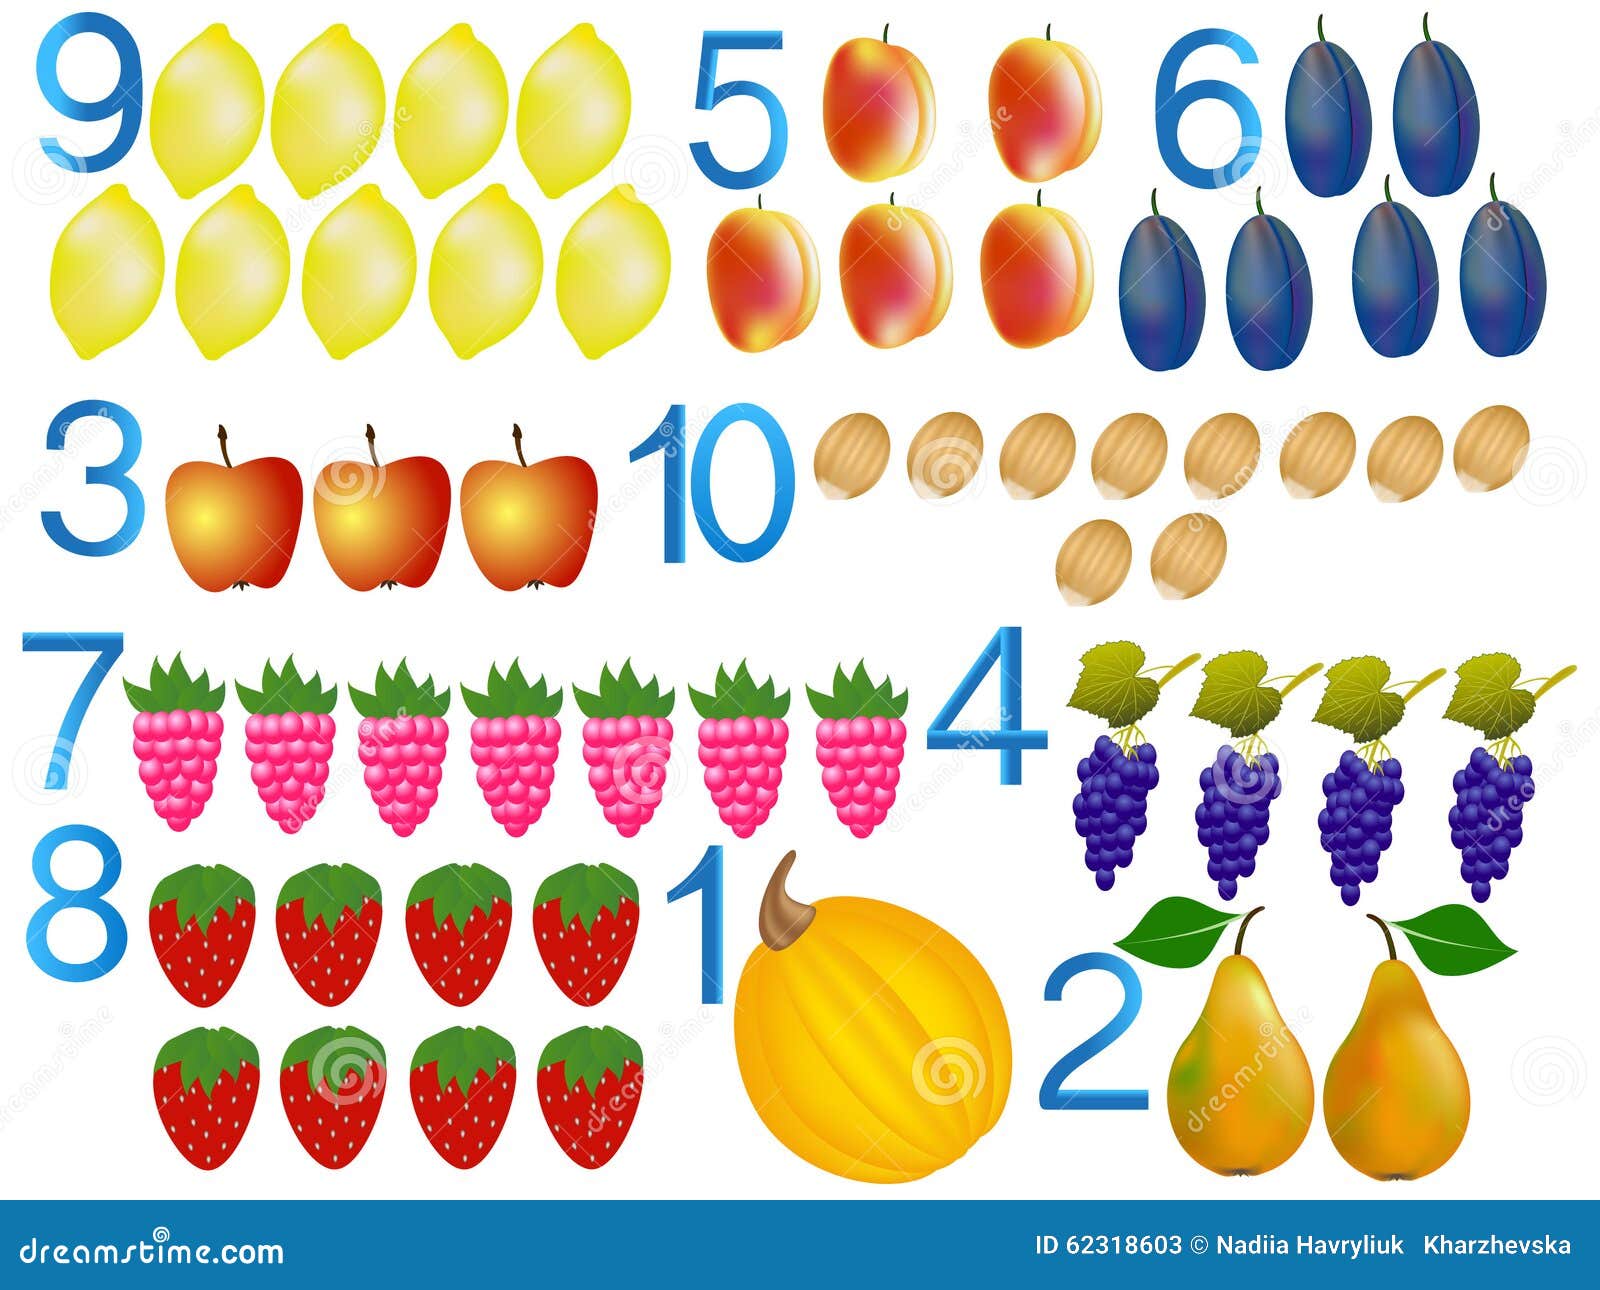 Дикие фрукты число. Fruit numbers. Numbers with Fruit. Count Fruit write numbers. Numbers from 1-5 matching with Fruits.